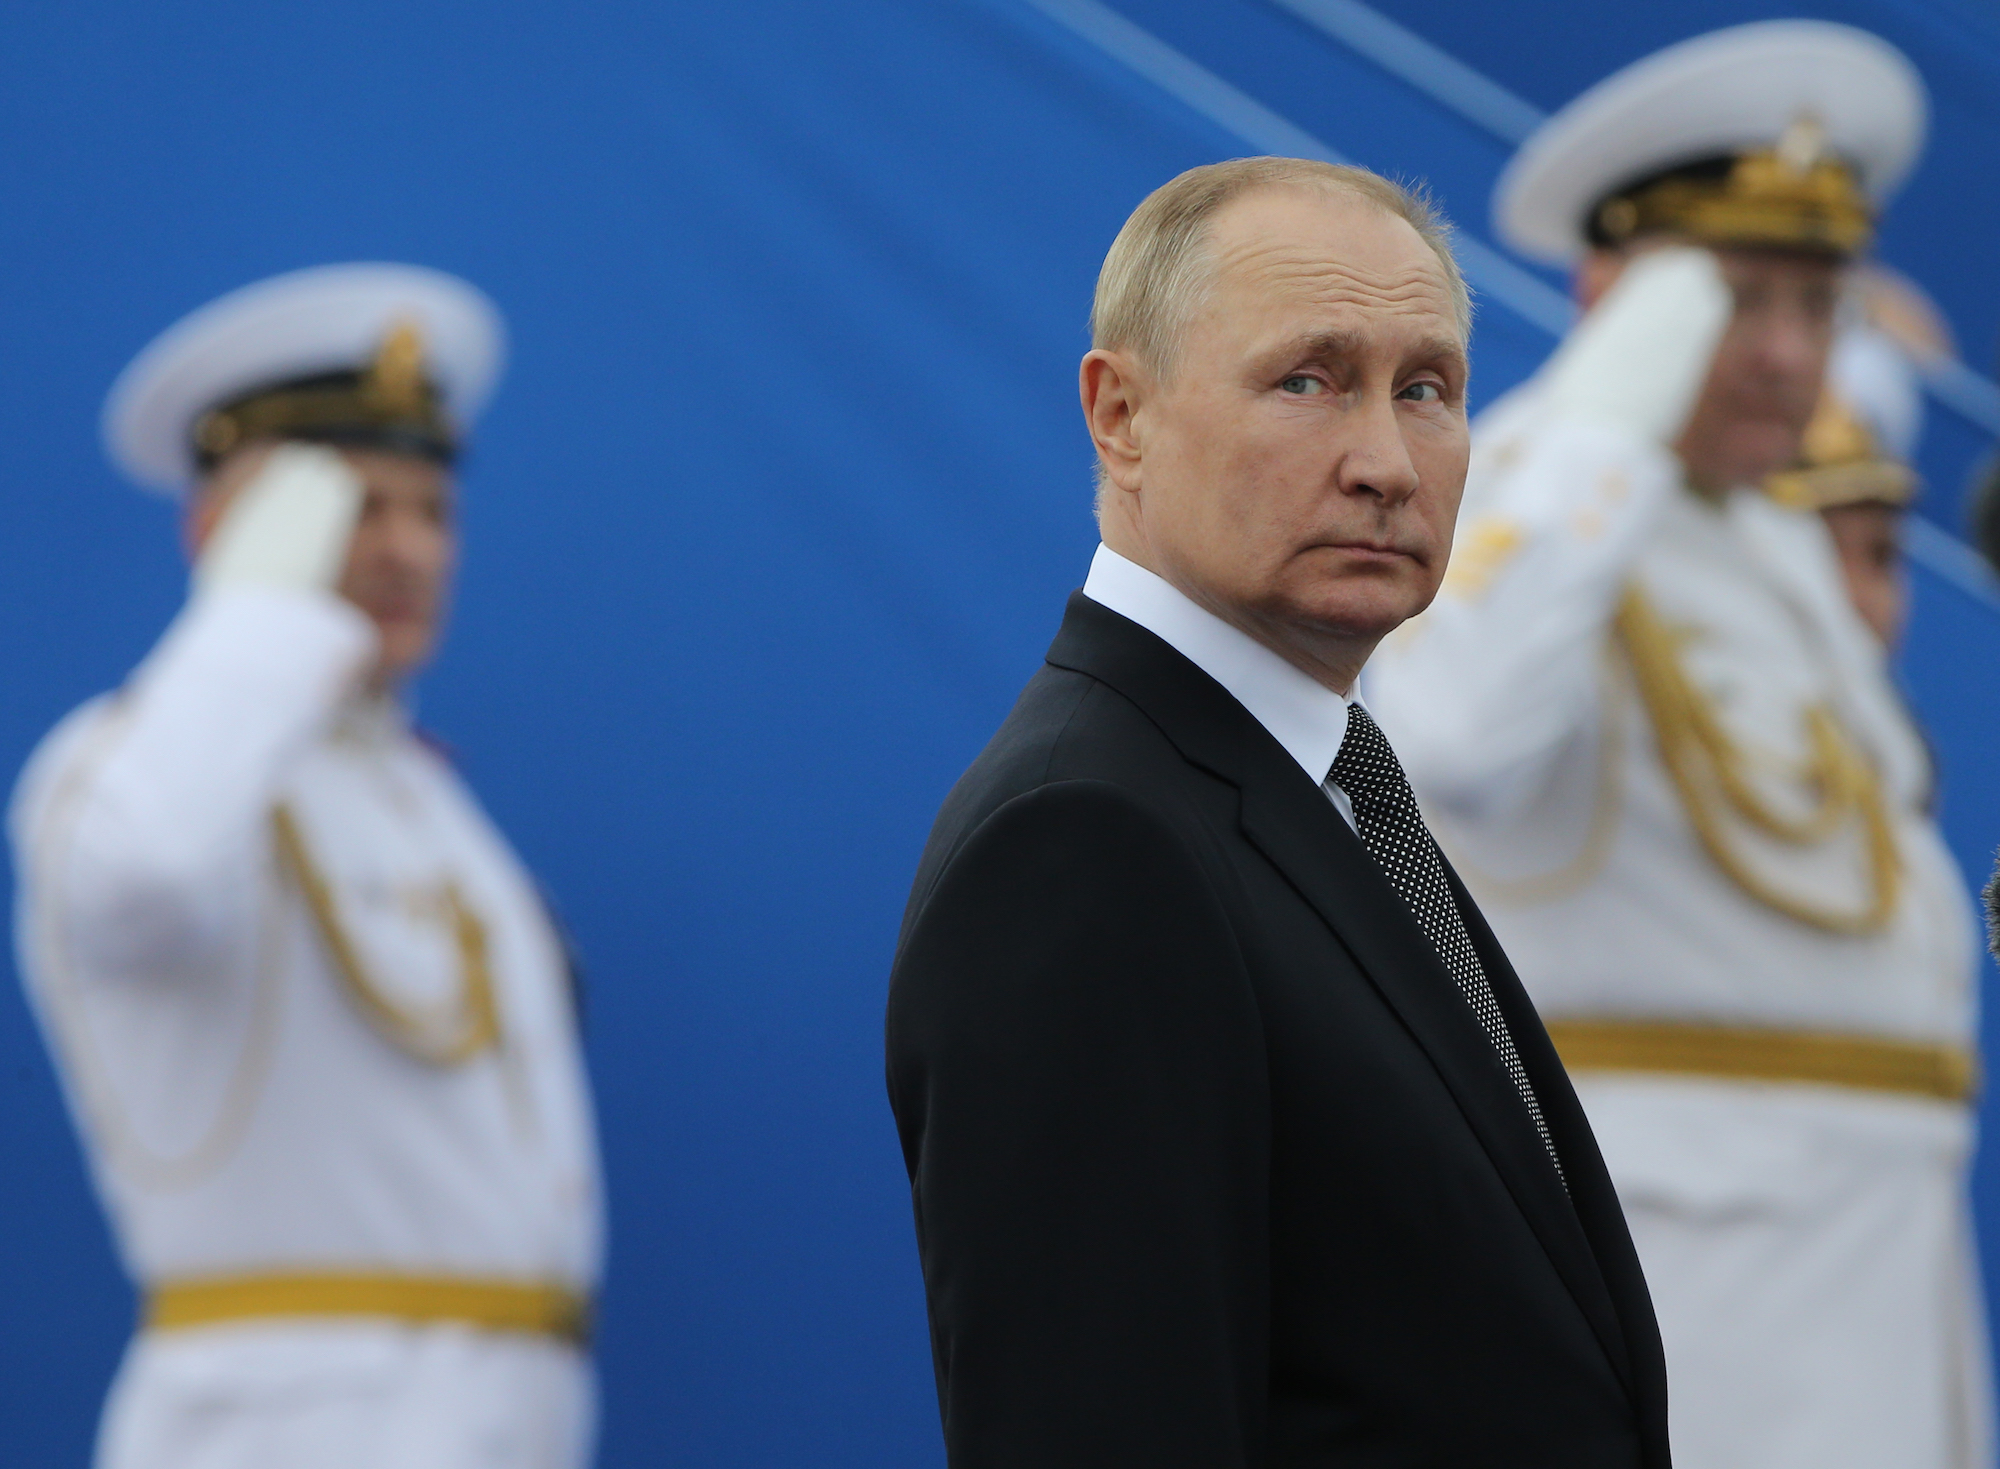 Vladimir Putin is seen during a military parade in Saint Petersburg on July, 31 2022.